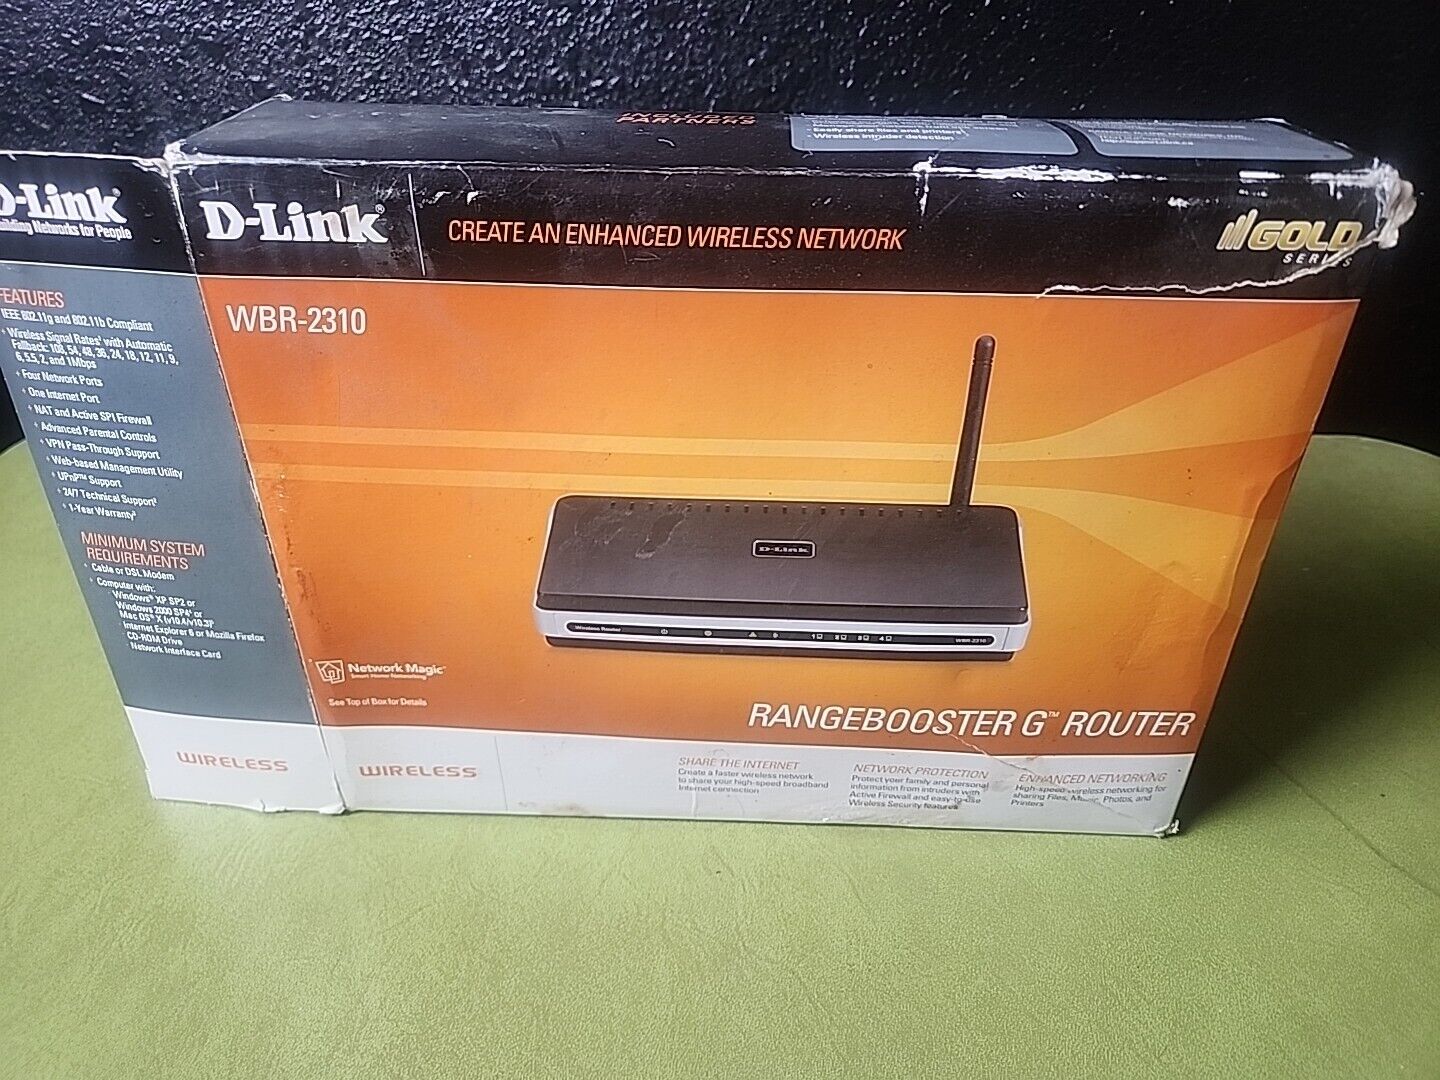 D-Link G WBR-2310 108 Mbps 4-Port 10/100 Wireless G Router with Adapter af1805A